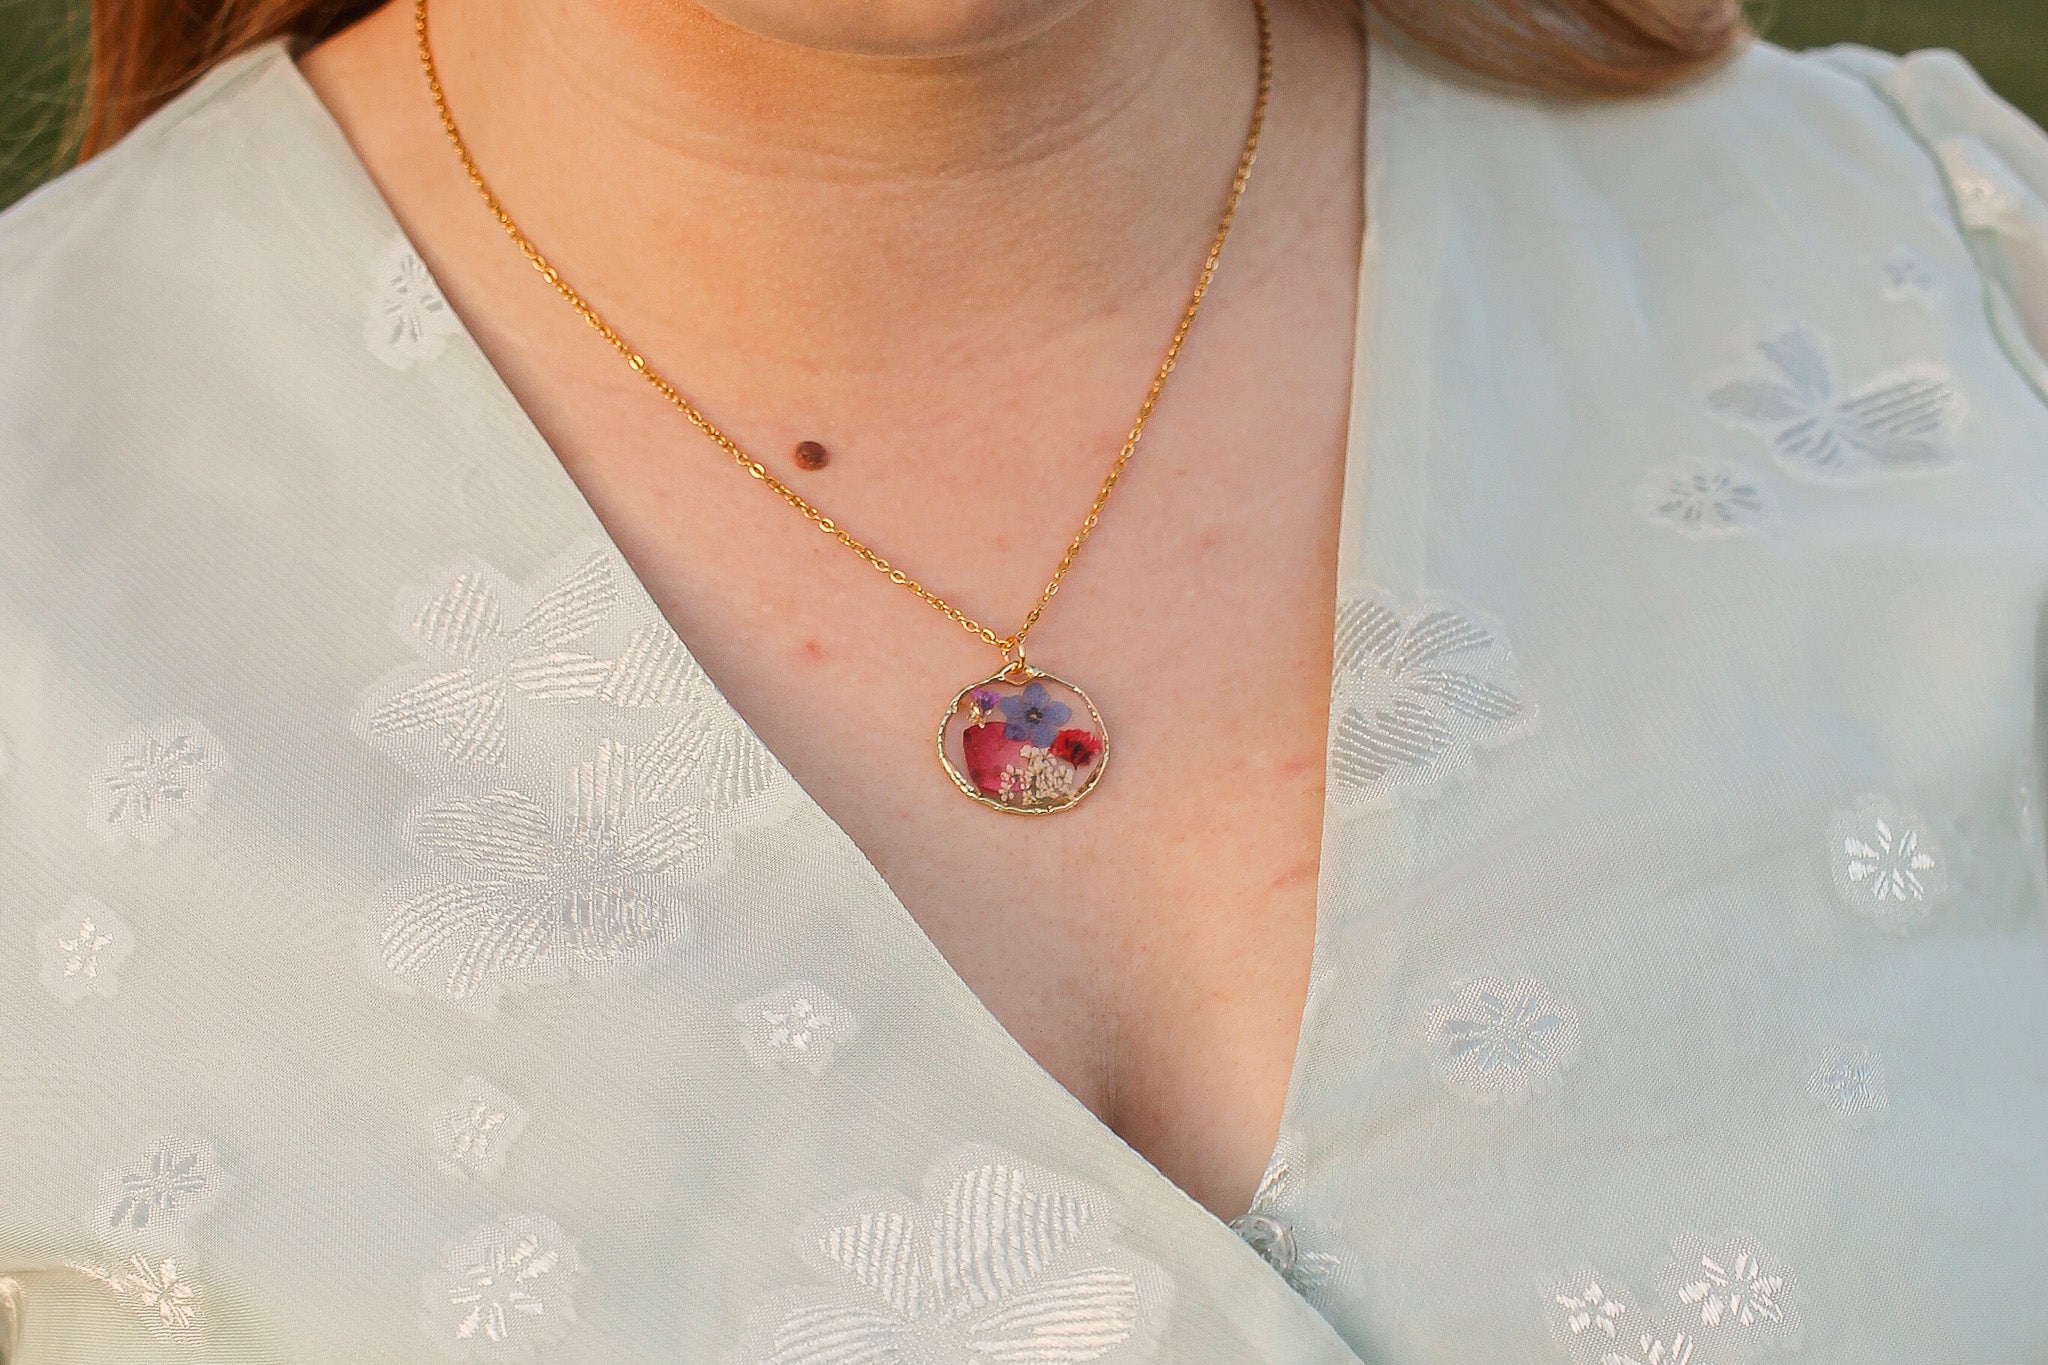 Nyla Pressed Flower Necklace in Multicolor